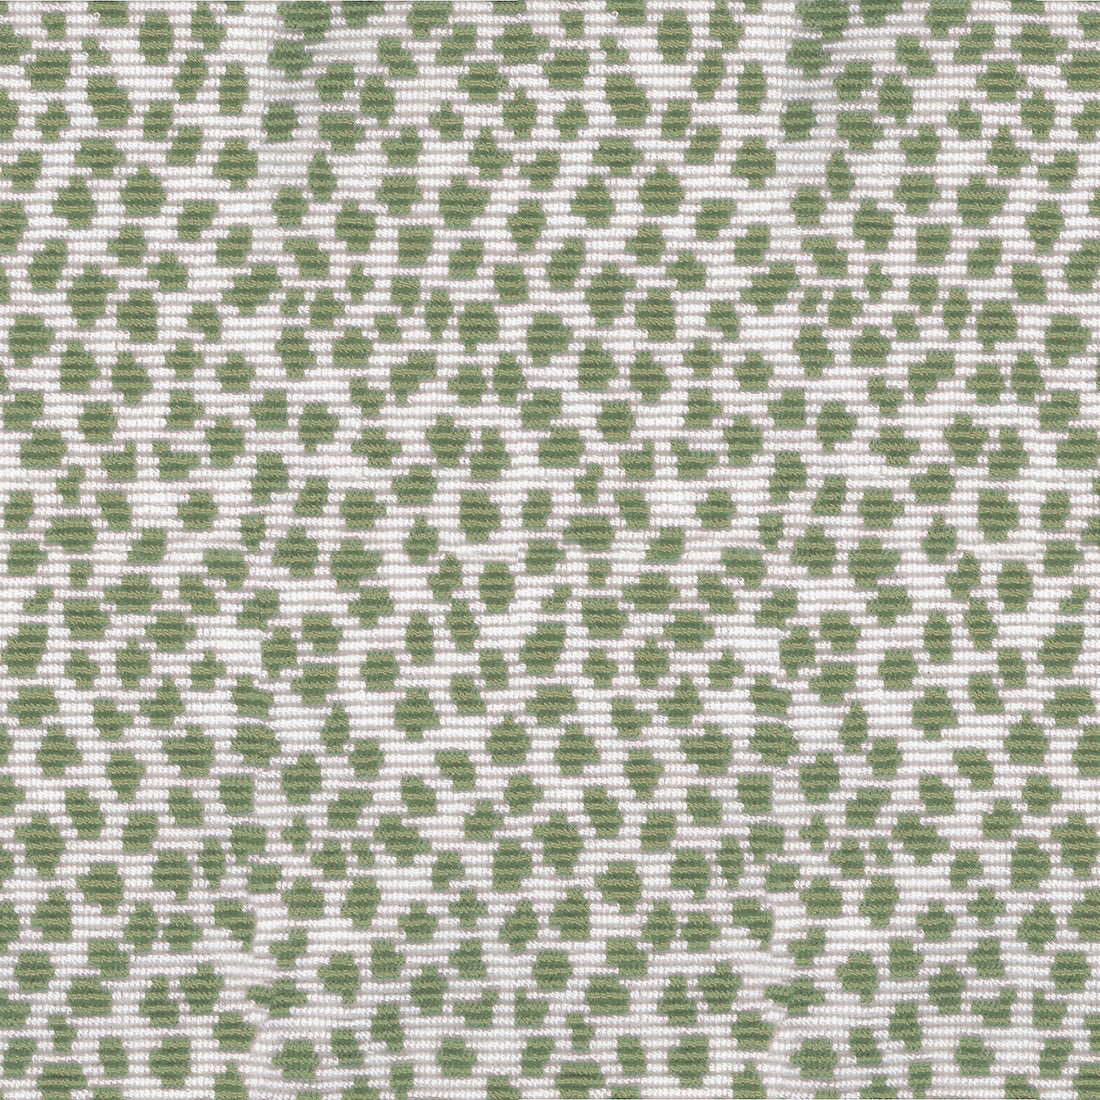 Graveson Woven fabric in sage color - pattern 8017104.3.0 - by Brunschwig &amp; Fils in the Durance collection